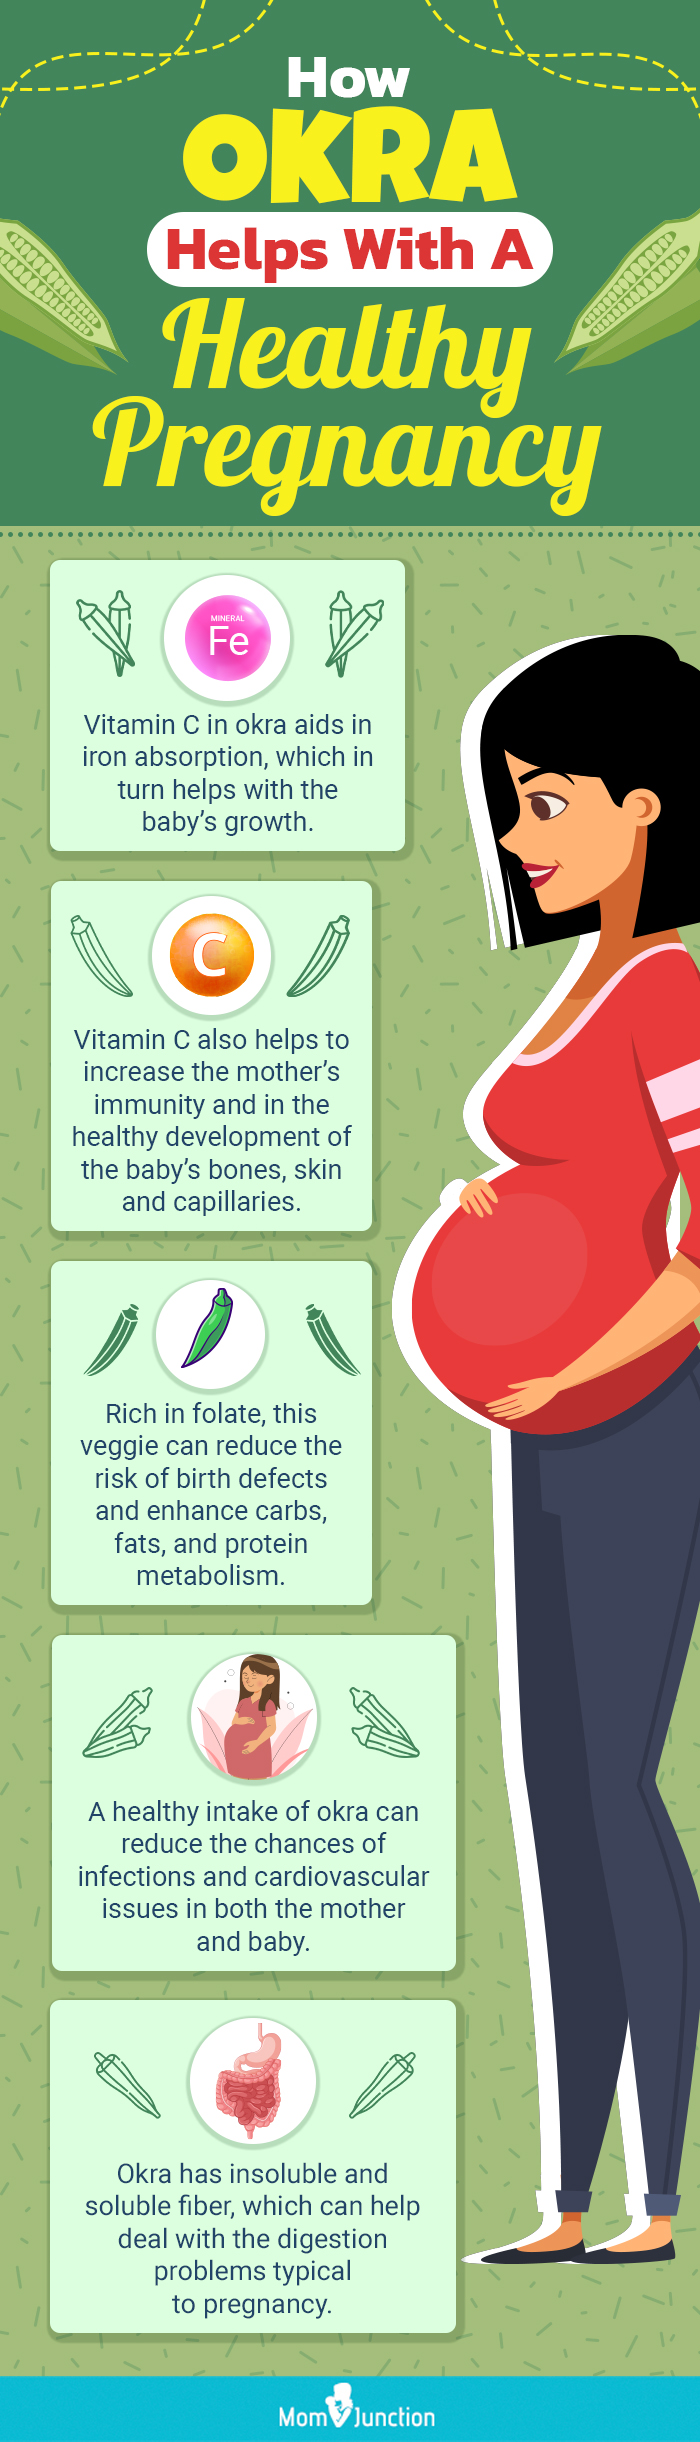 how okra helps with a healthy pregnancy (infographic)